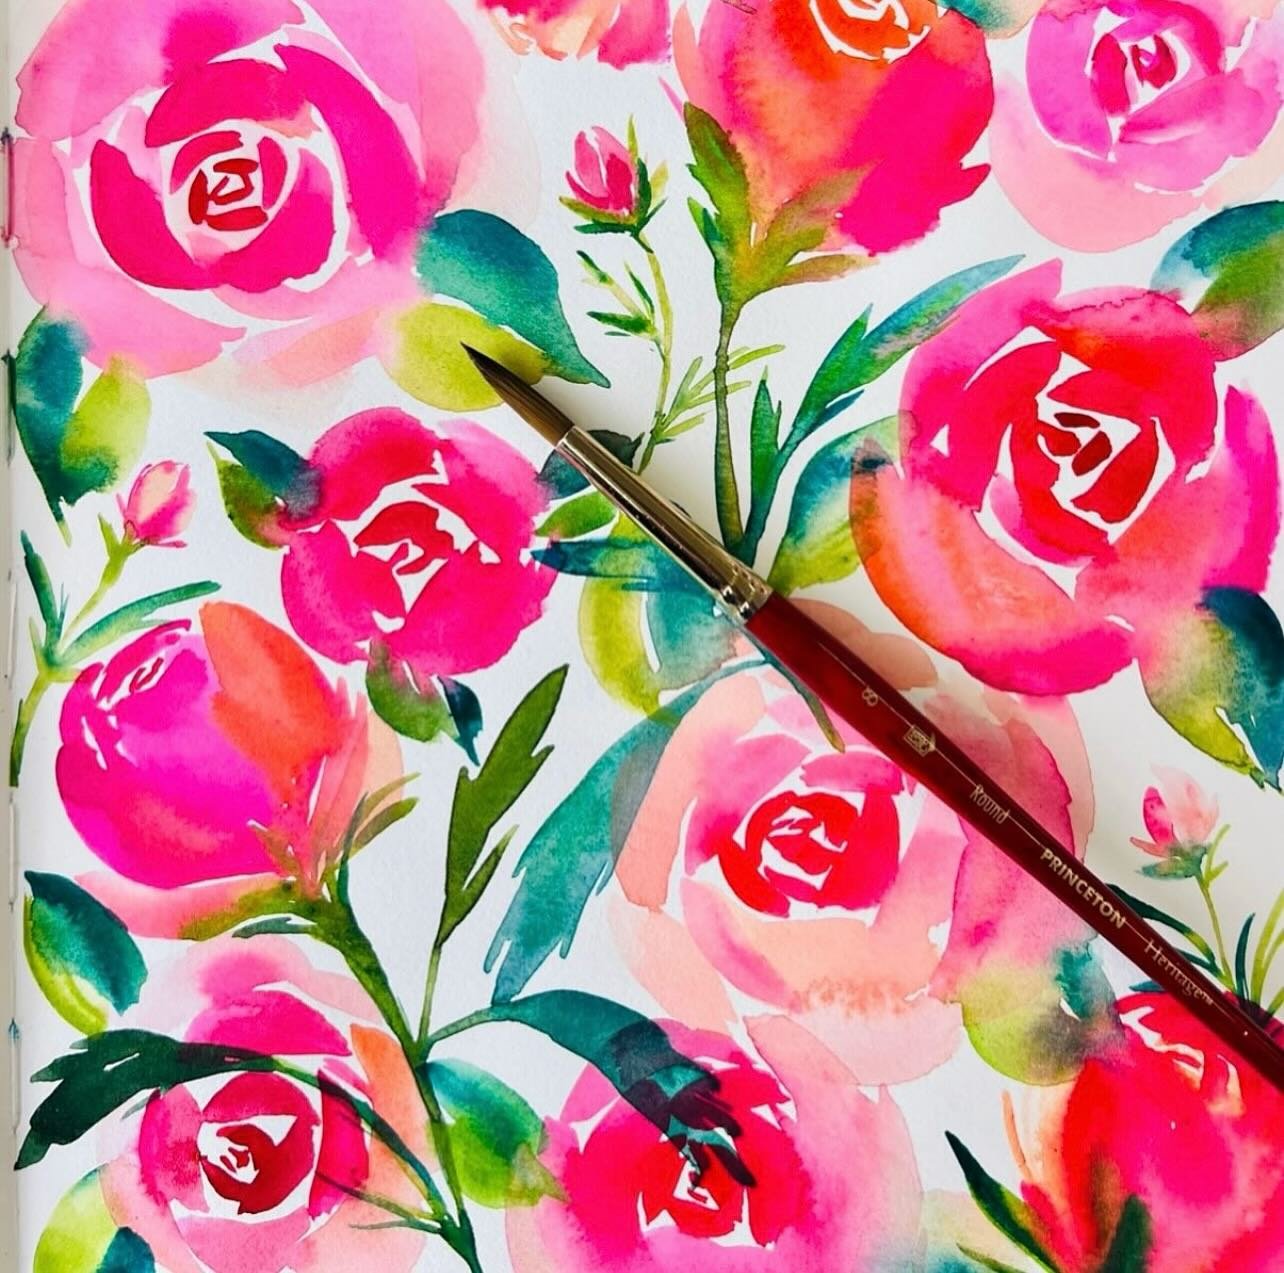 Taking a bit is a break this summer to &ldquo;stop and smell the roses&rdquo; and maybe paint them too! 🌹🌹🌹
Have you taken my online watercolor floral workshop called FLOWER POWER? Did you know you can gather a group of friends at your home or tak